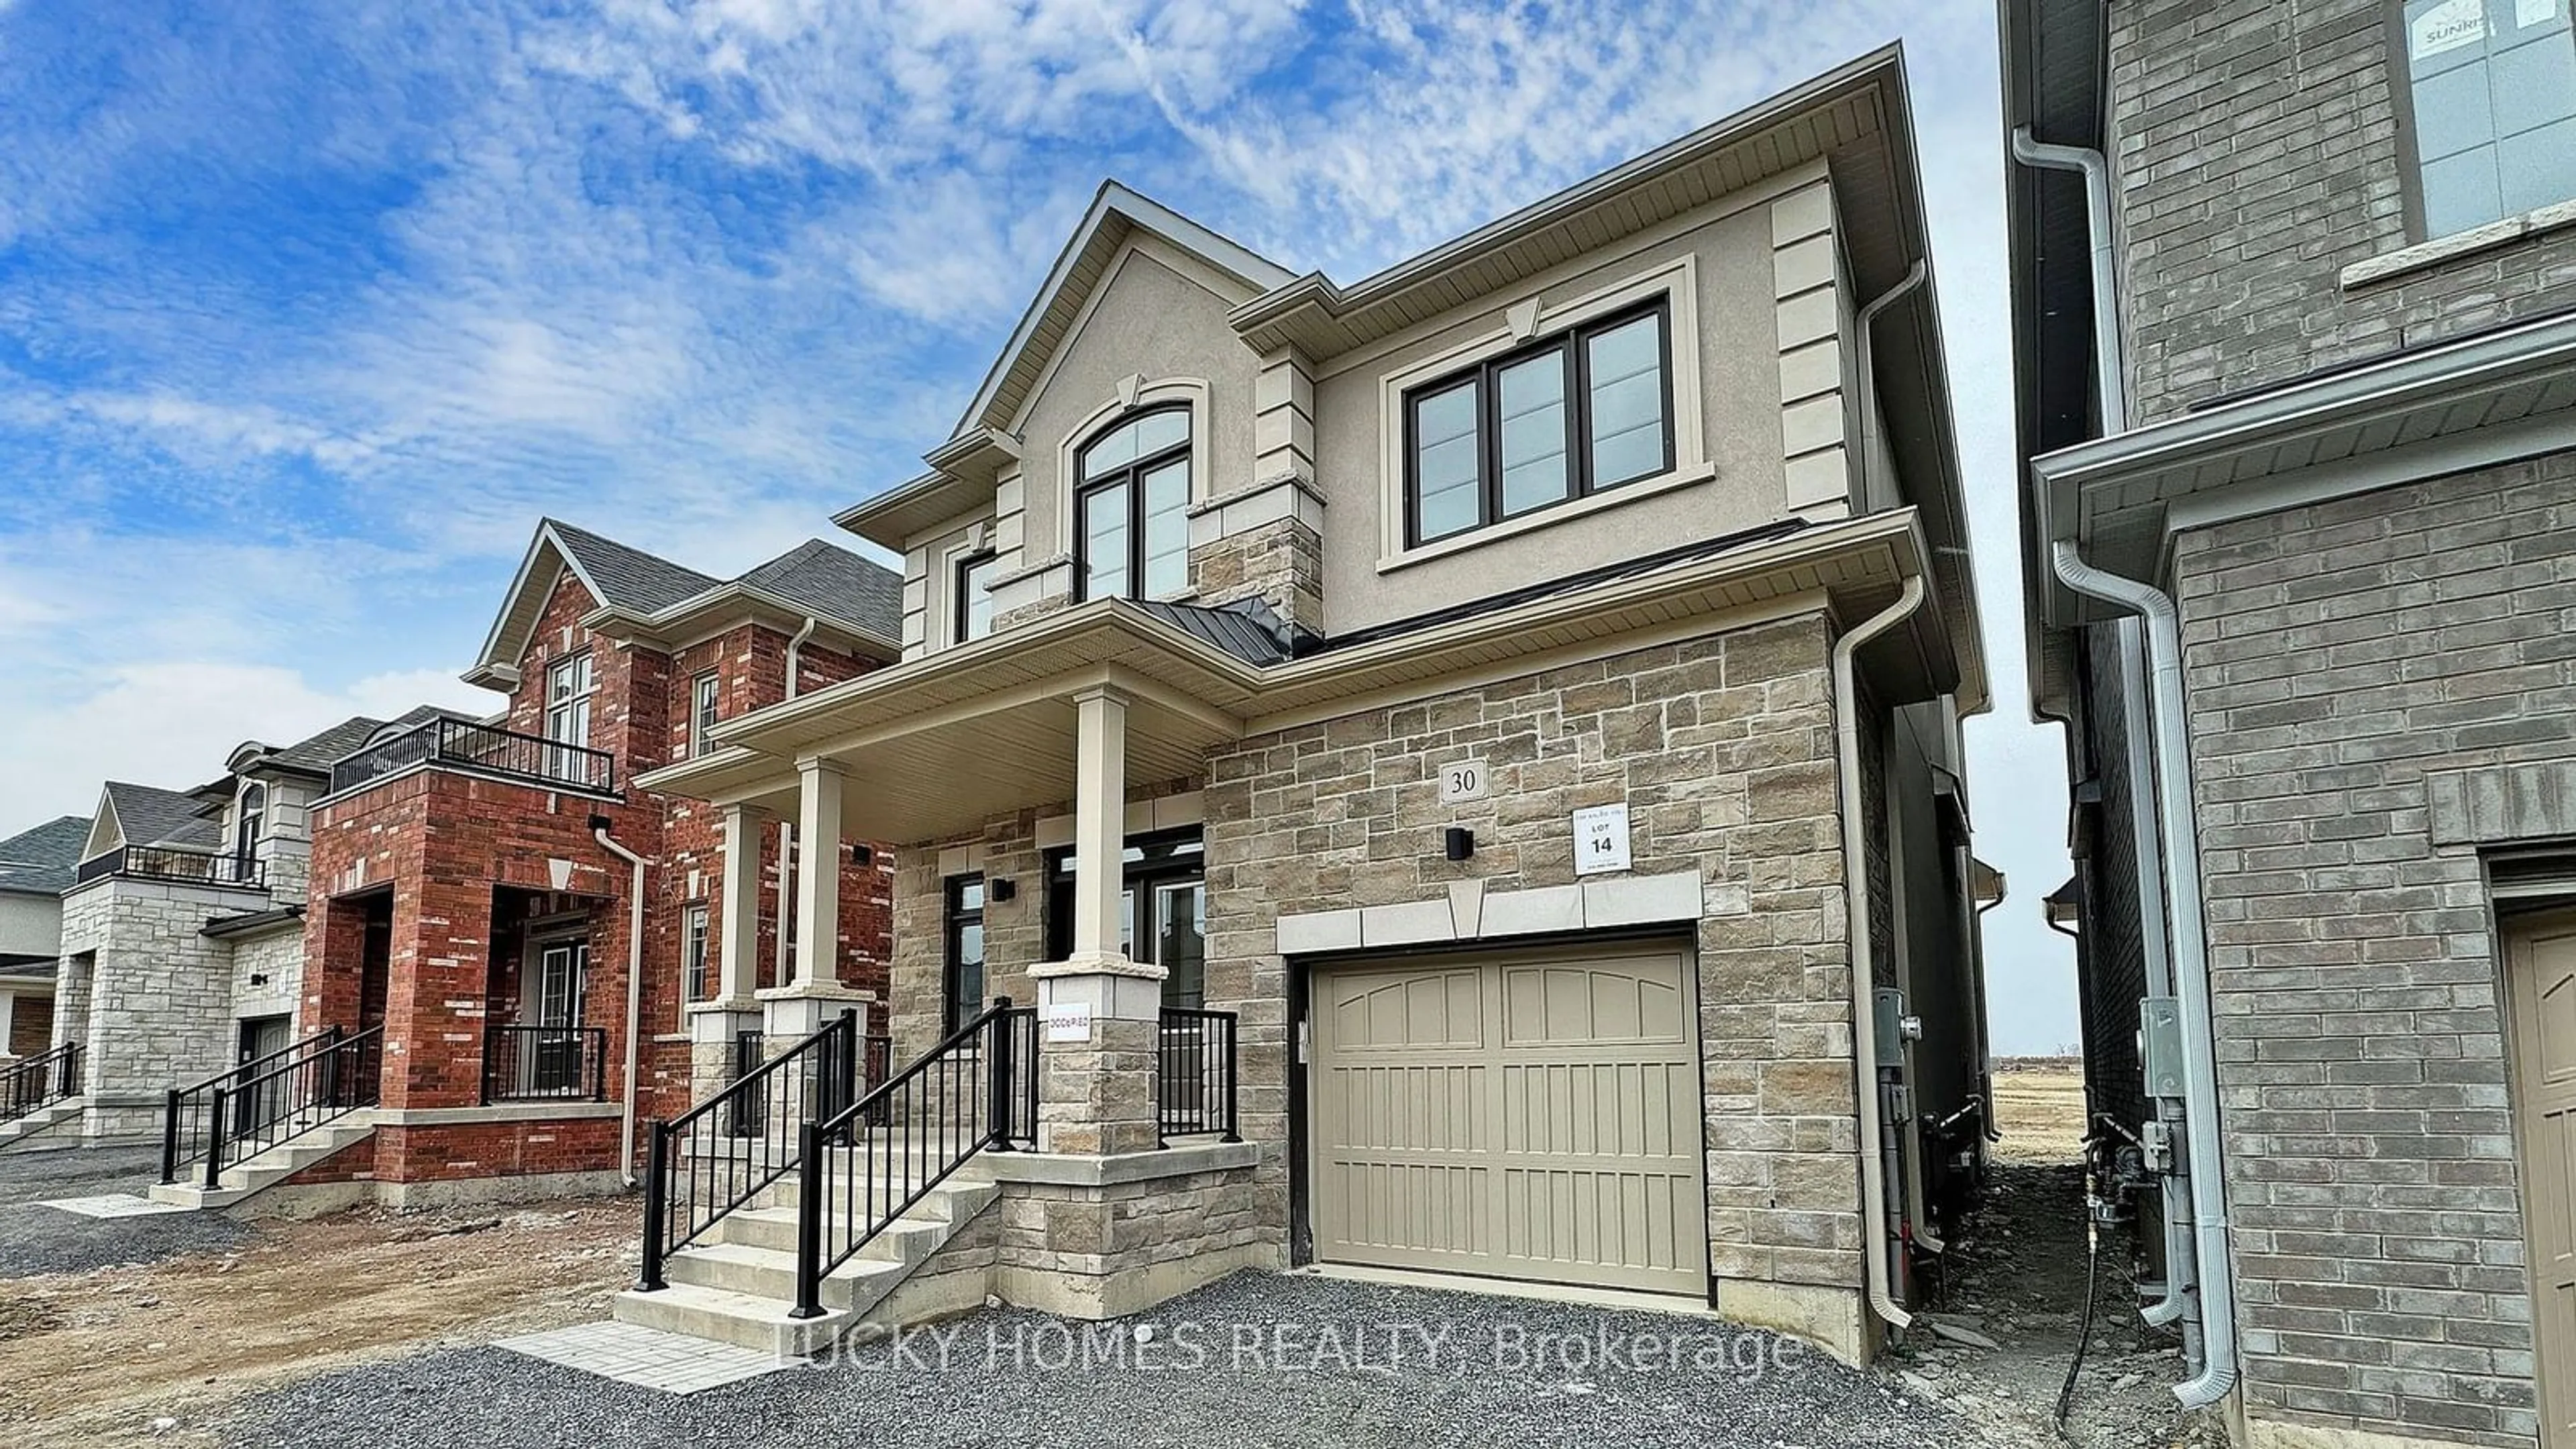 Home with brick exterior material for 30 Ed Ewert Ave, Clarington Ontario L1B 0W9